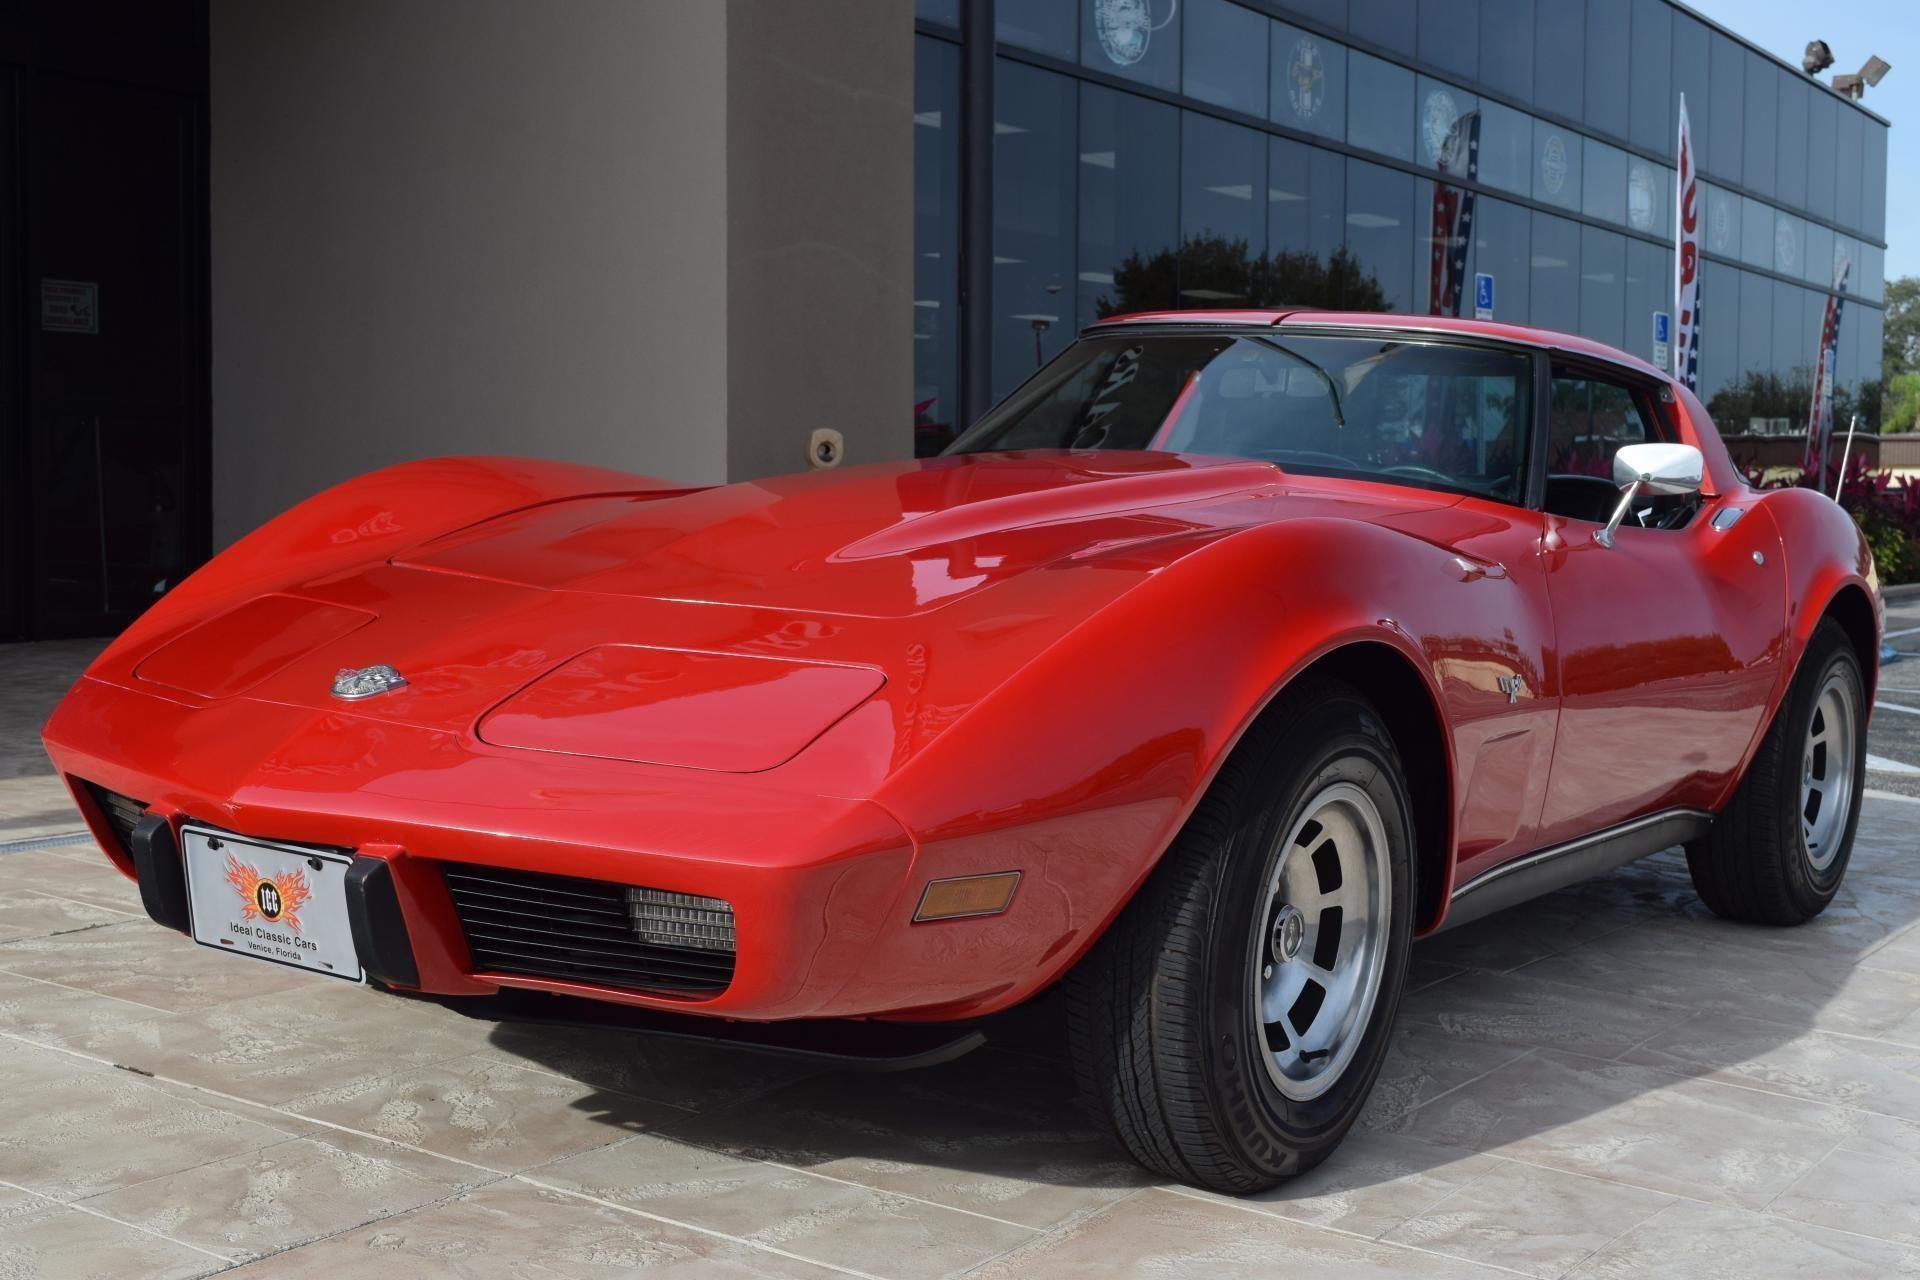 These real Medium Red paint pictures of real 1978 Chevy Corvette really sho...